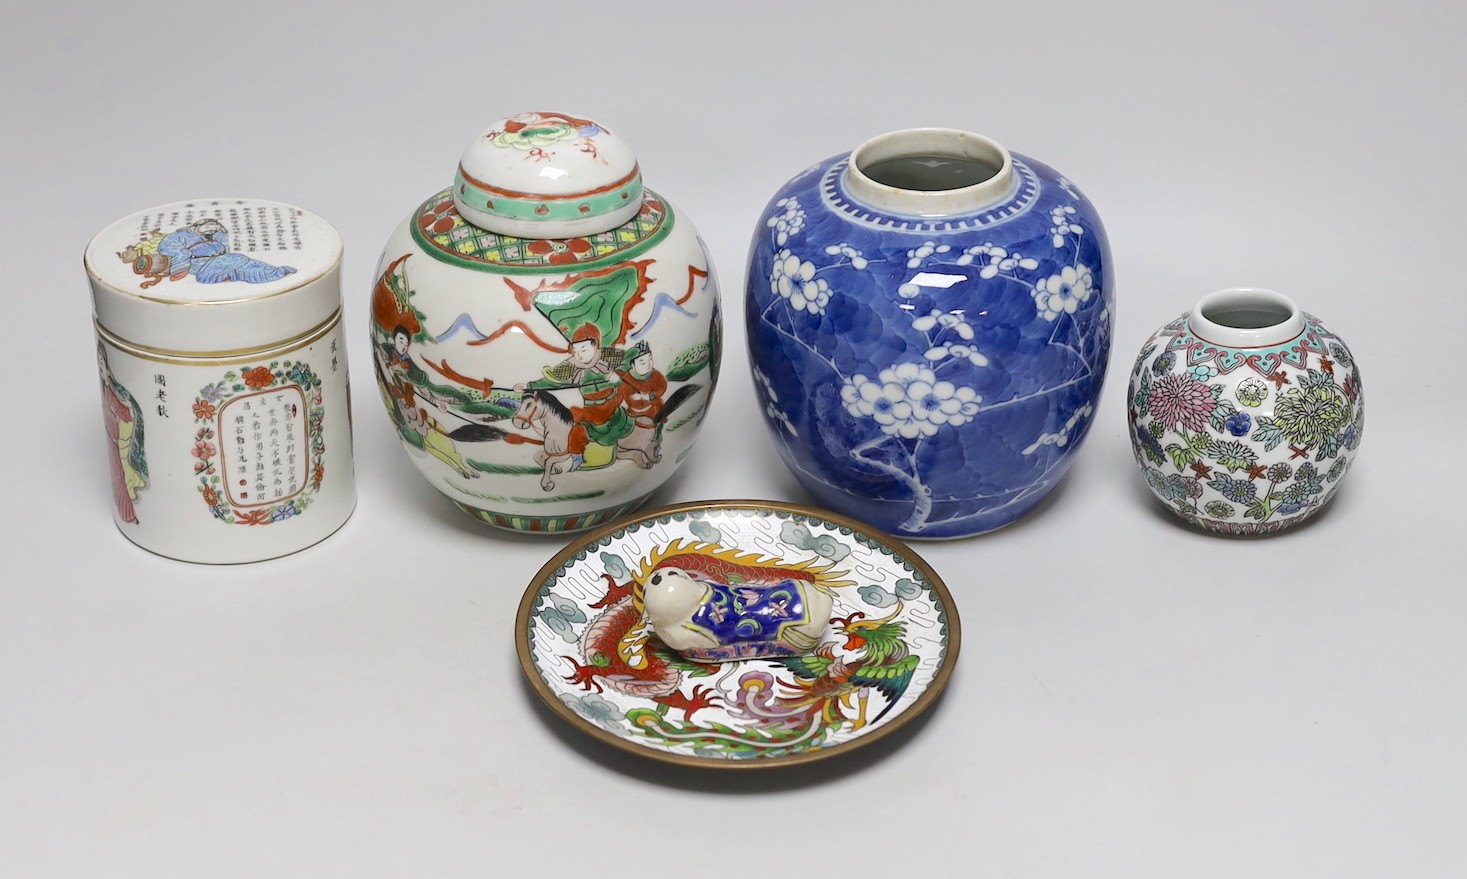 A 19th century Chinese famille rose box and cover, a blue and white prunus jar, two other jars, a